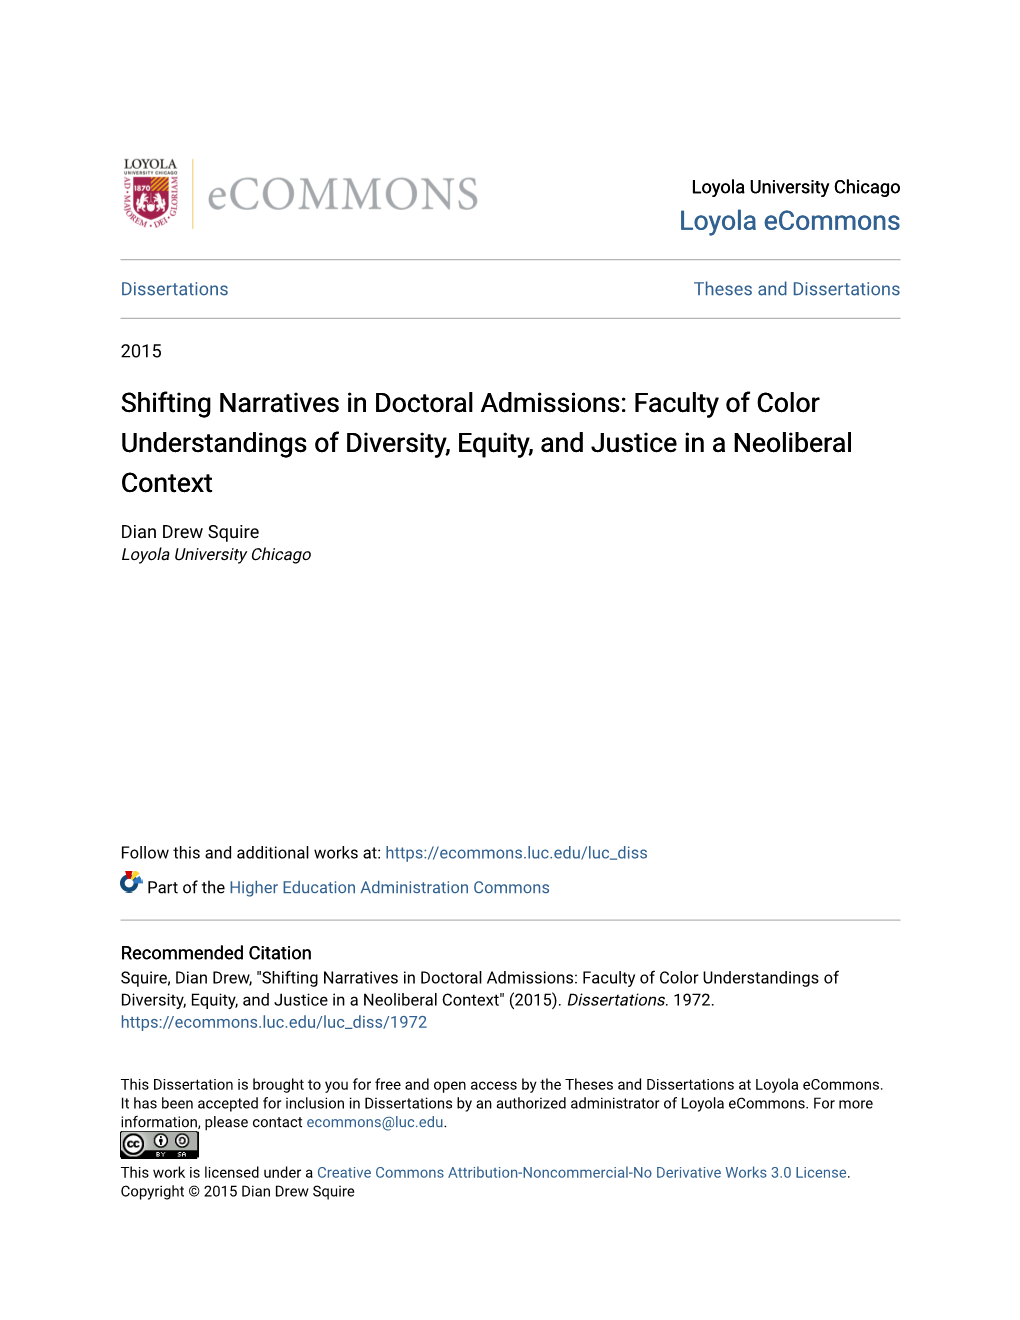 Faculty of Color Understandings of Diversity, Equity, and Justice in a Neoliberal Context